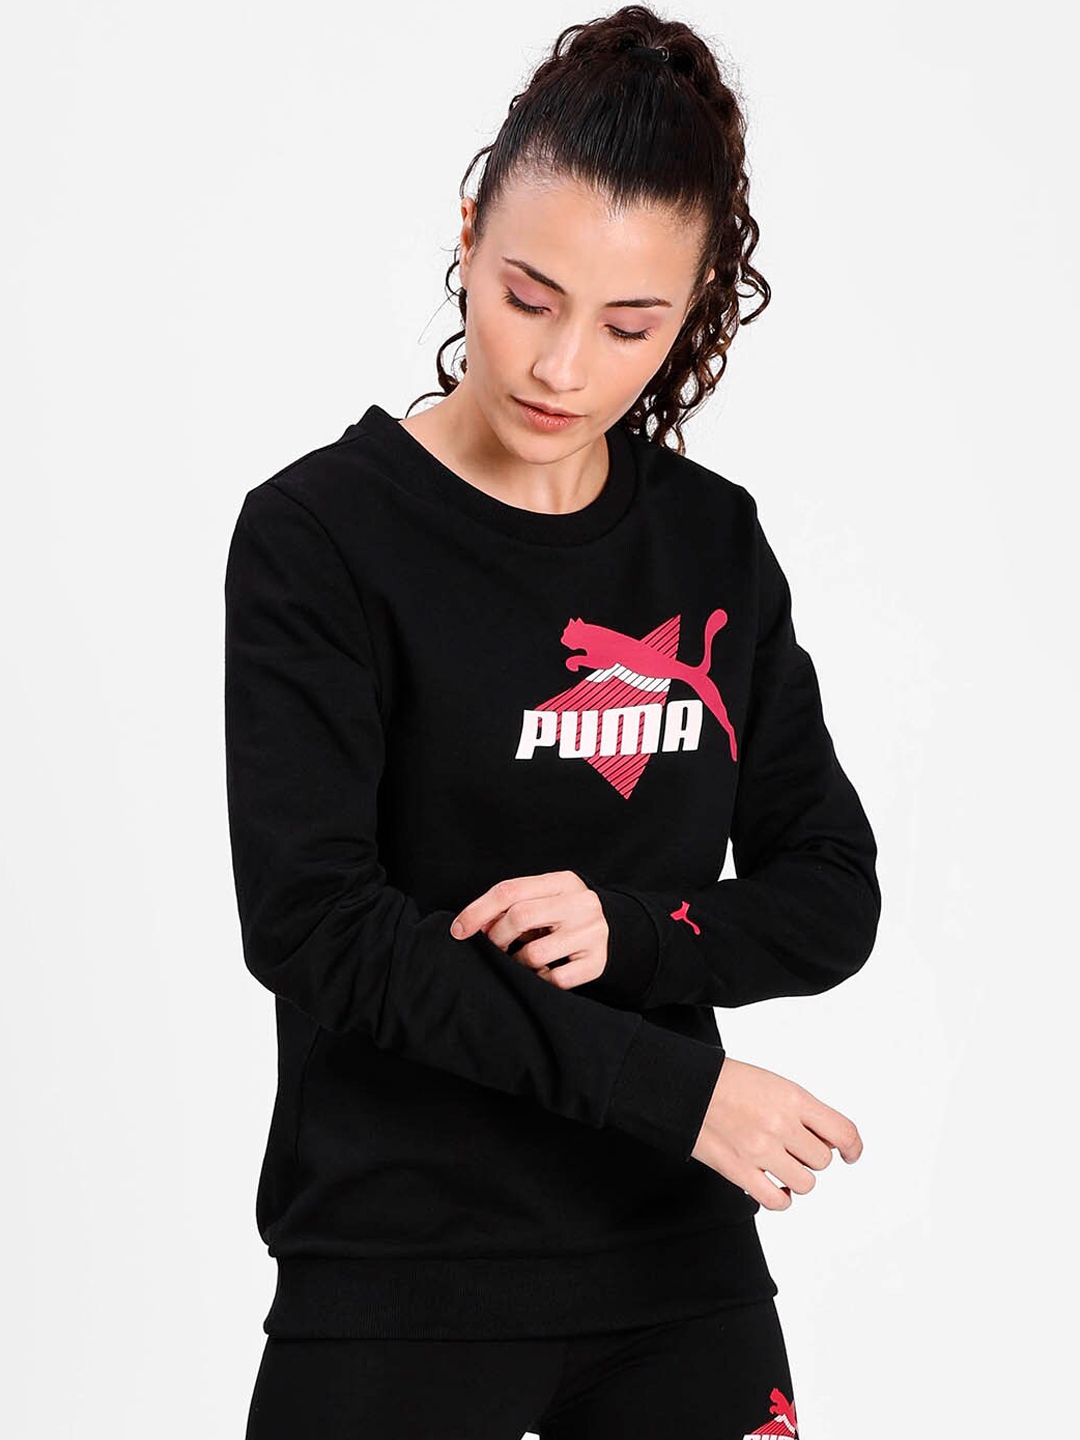 Buy Puma Women Black Printed Pullover Sweater - Sweaters for Women ...